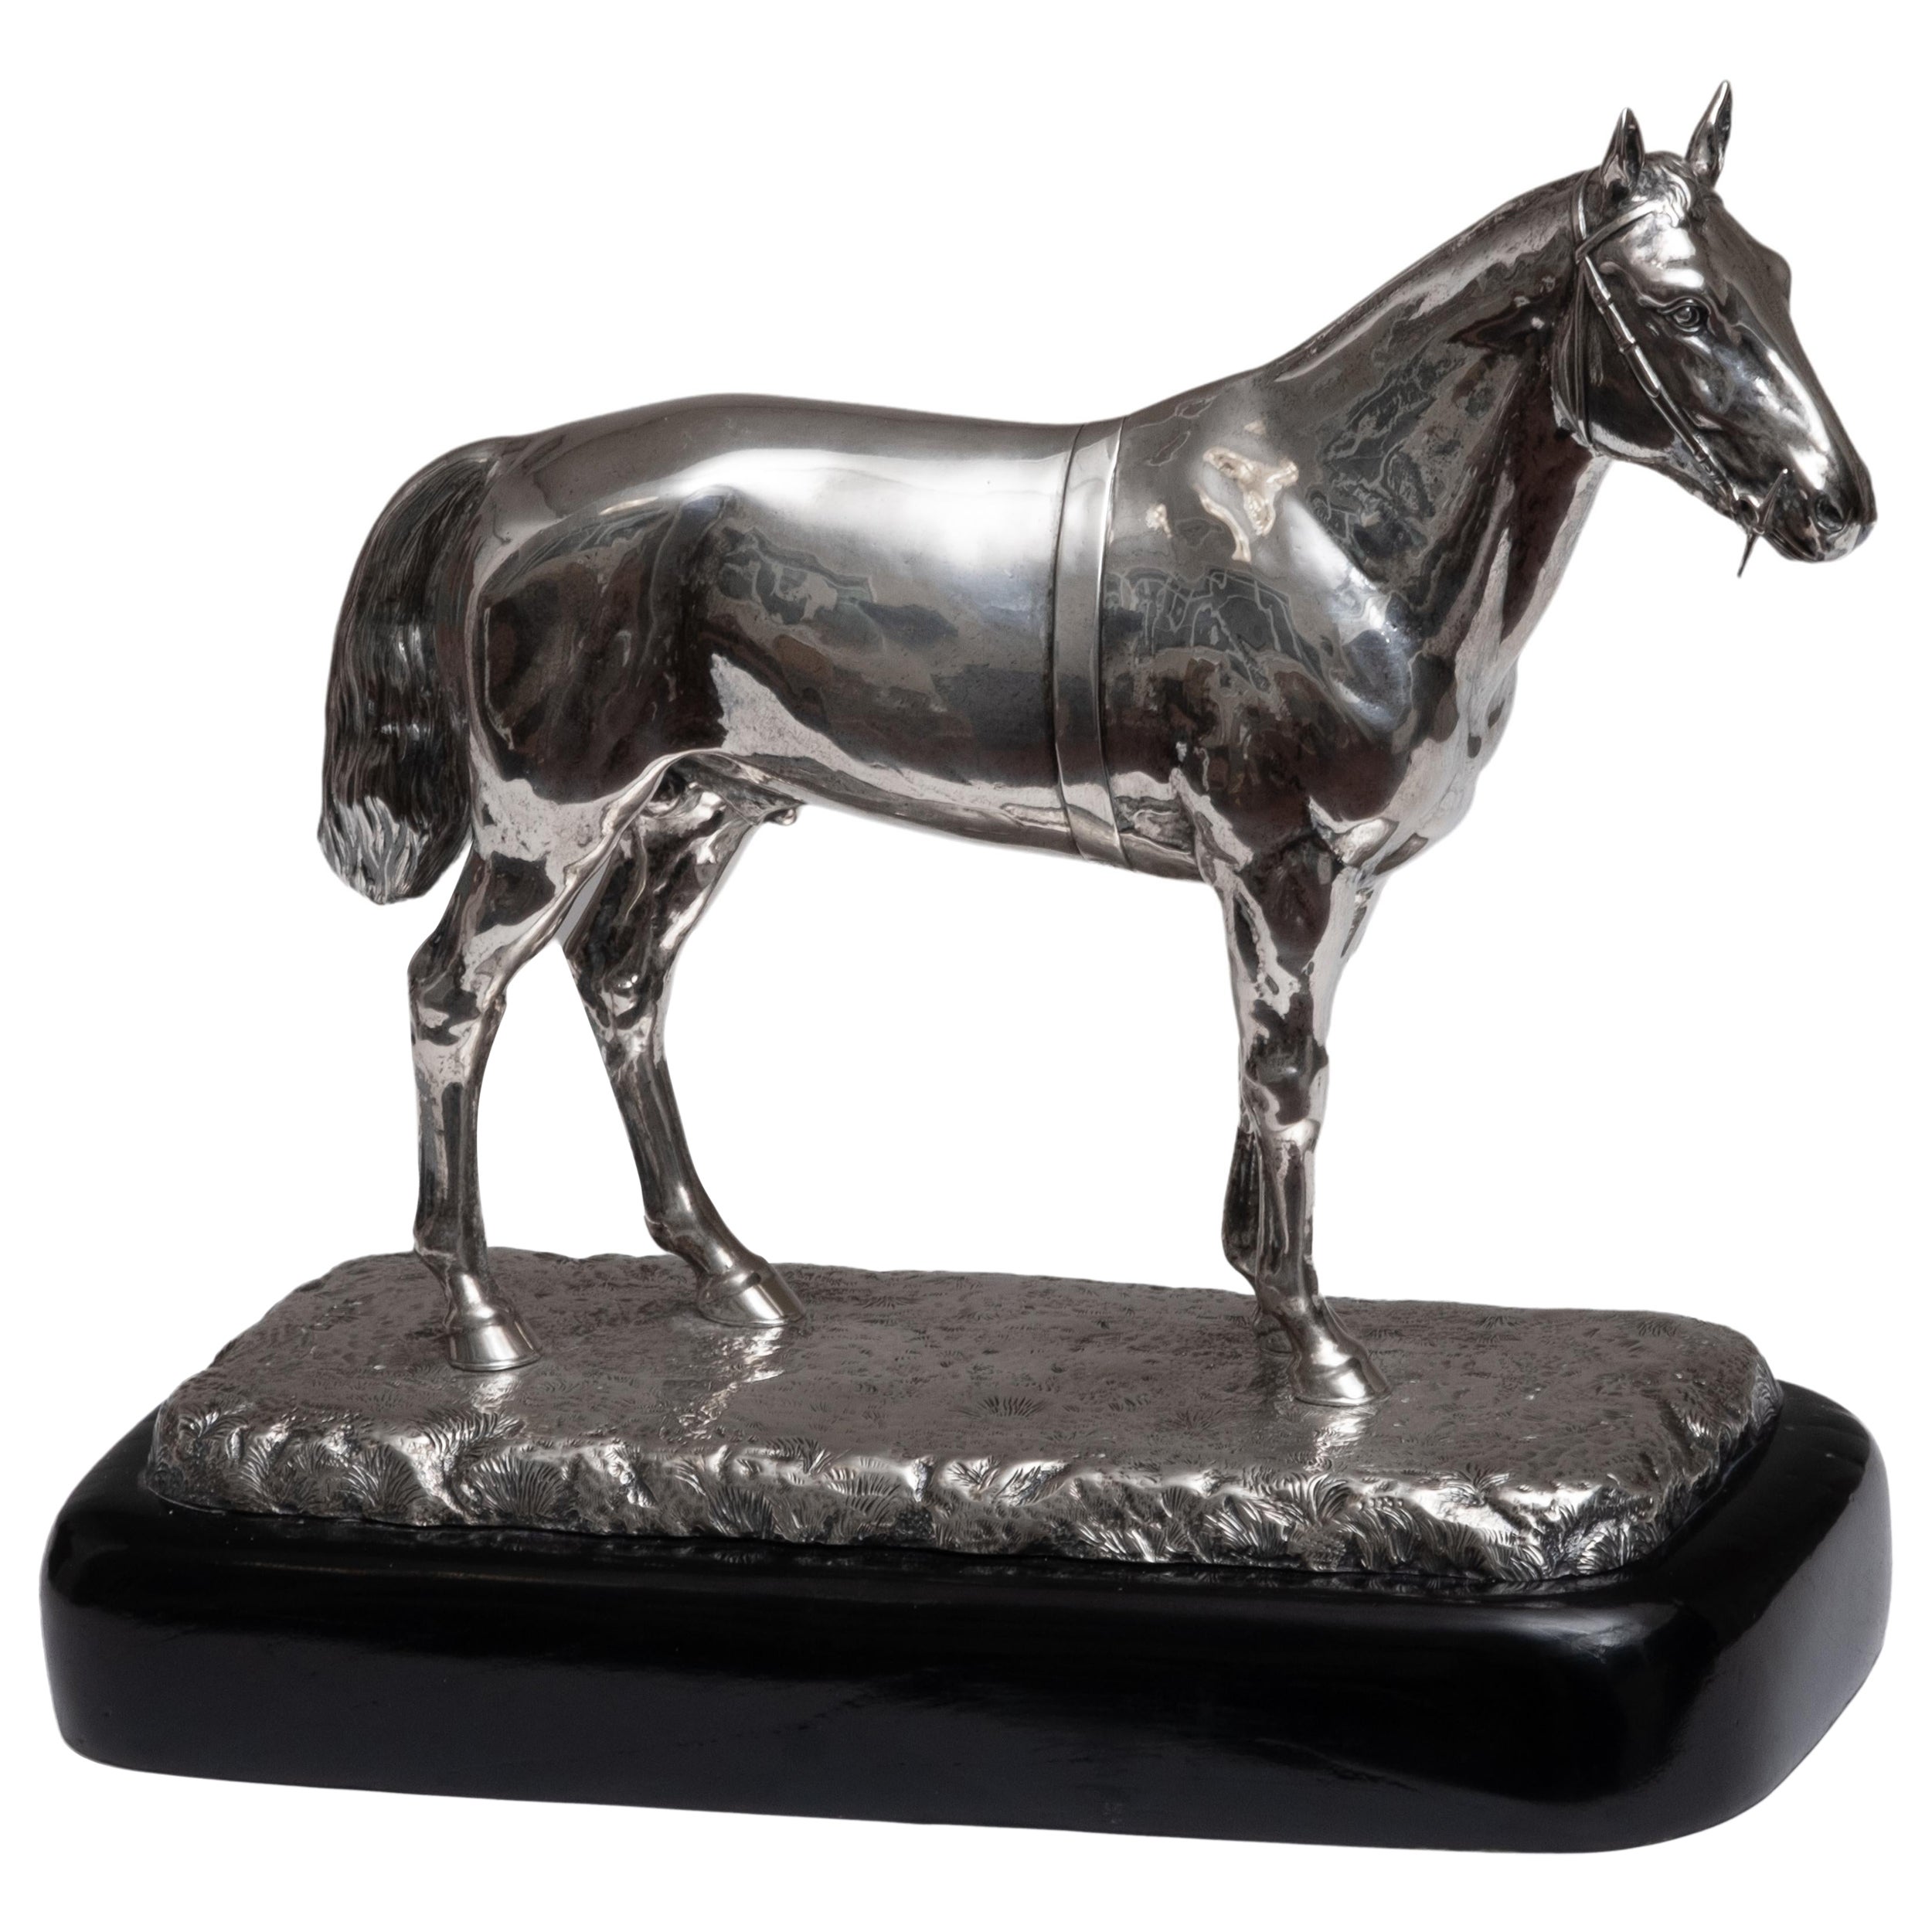 Antique English Sterling Silver Equestrian Sculpture, Dated 1907 For Sale